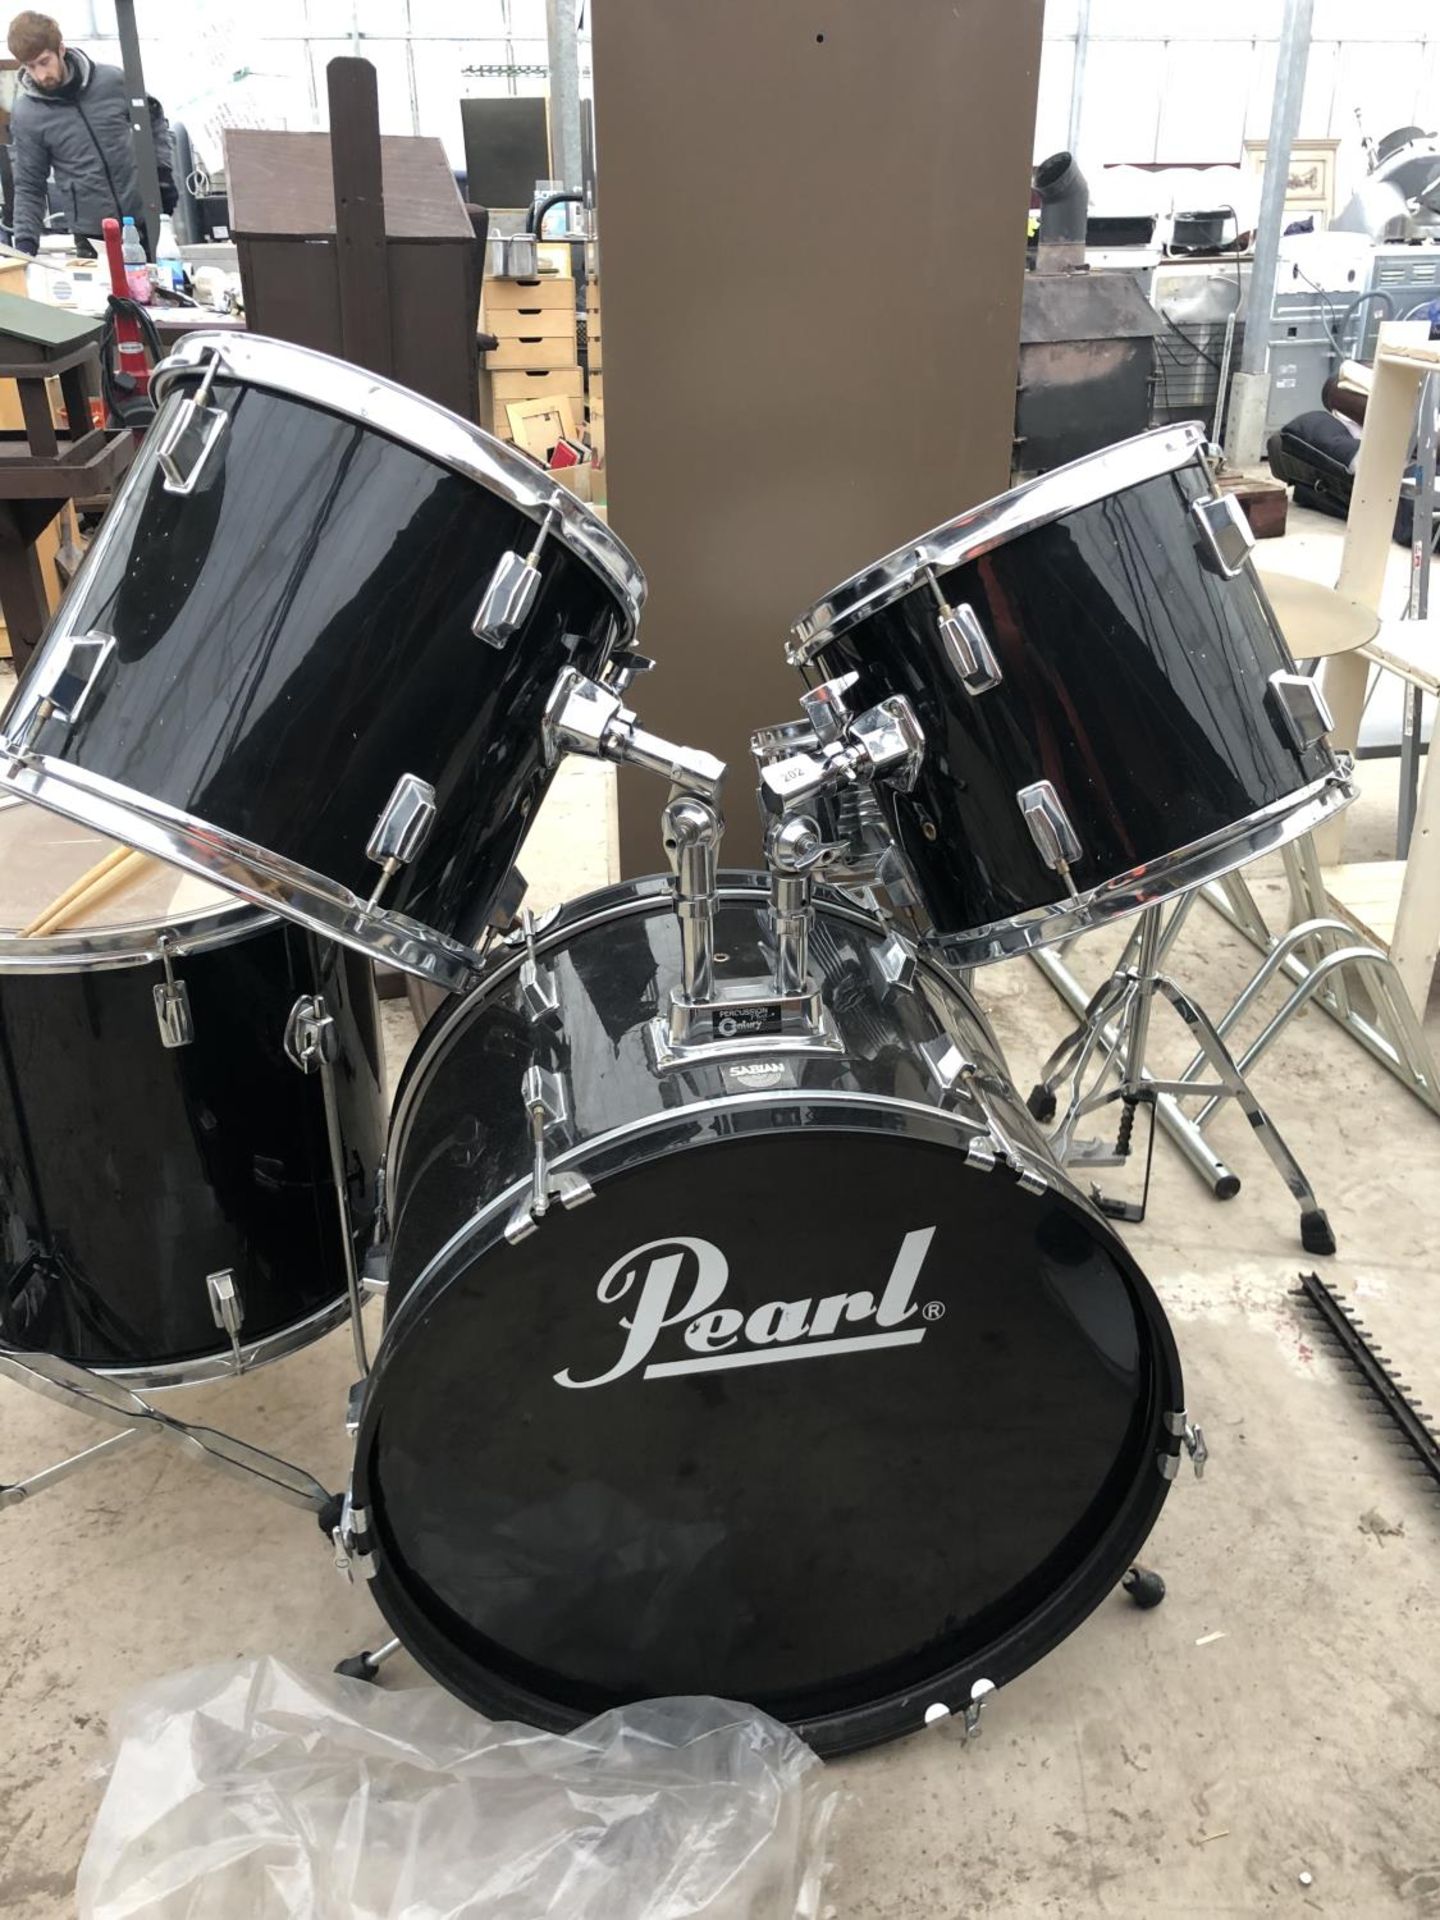 A 'PEARL' SESSION DRUM KIT - Image 2 of 4